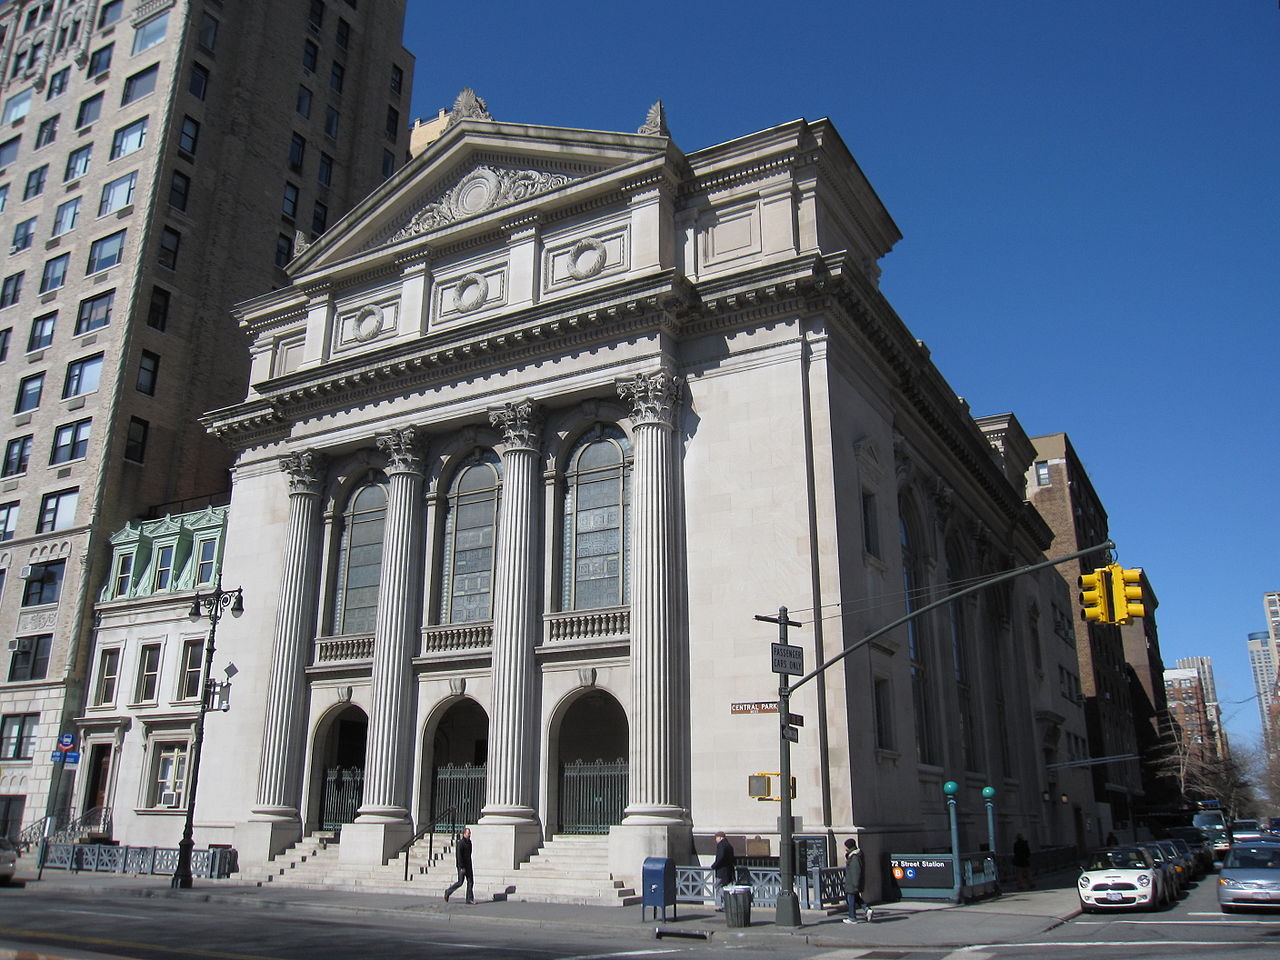 99 Central Park West (Congregation Shearith Israel Synagogue & Rectory)